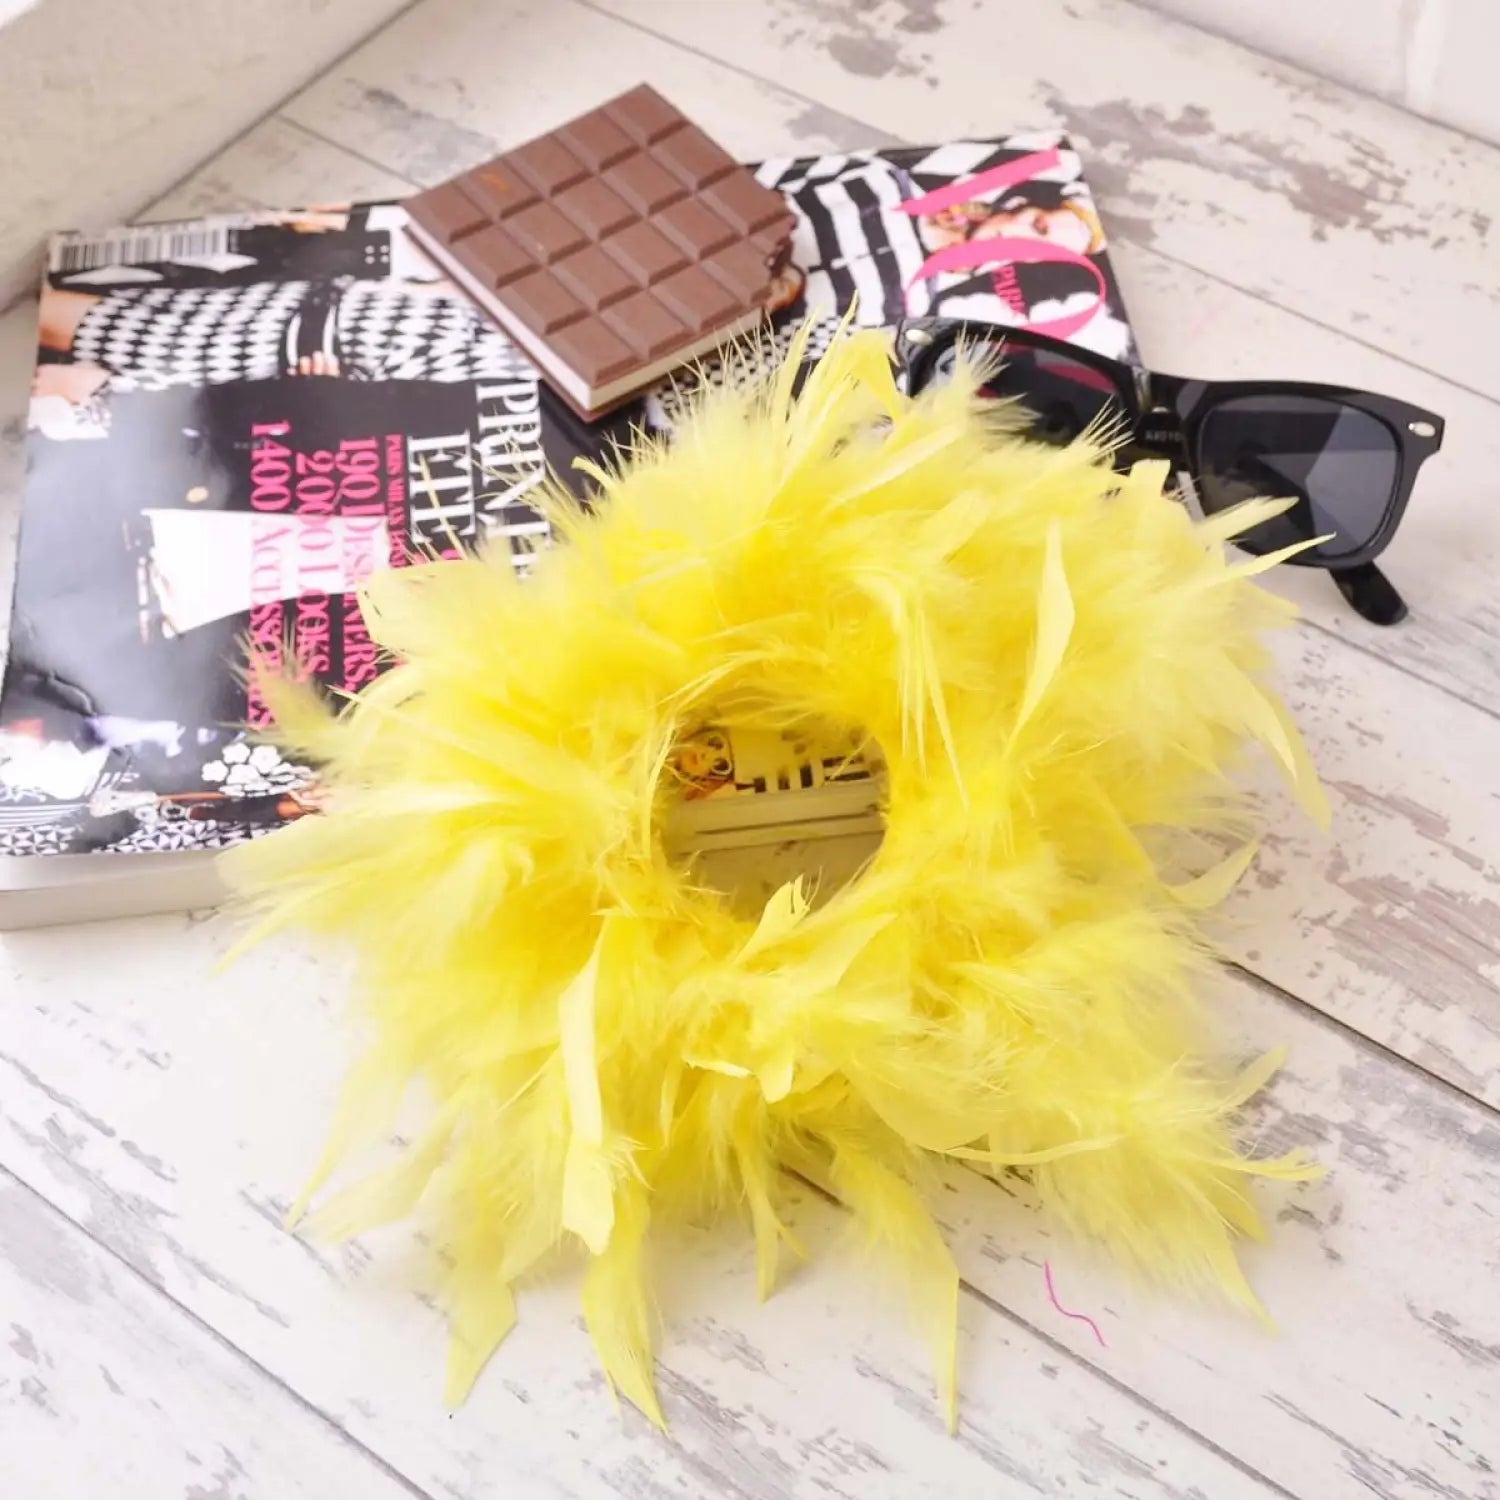 Oversized Feather Hair Scrunchie with Yellow Flower and Chocolate Bar Displayed